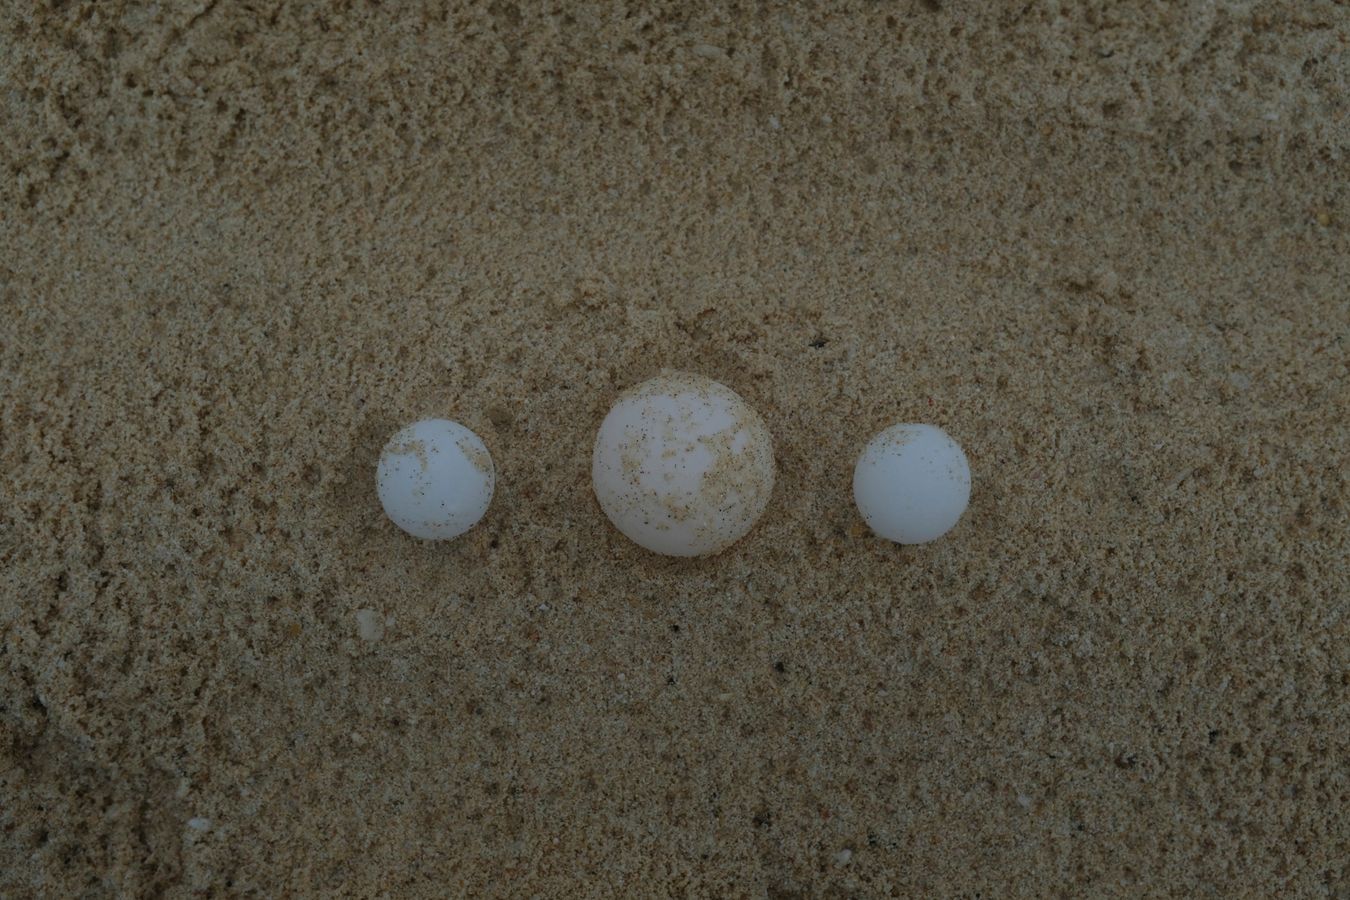 Three green turtle eggs, only the one in the center has the normal size and shape, however, it is not a recently laid egg, which are more yellowish in color, this is an egg that has been incubating fo